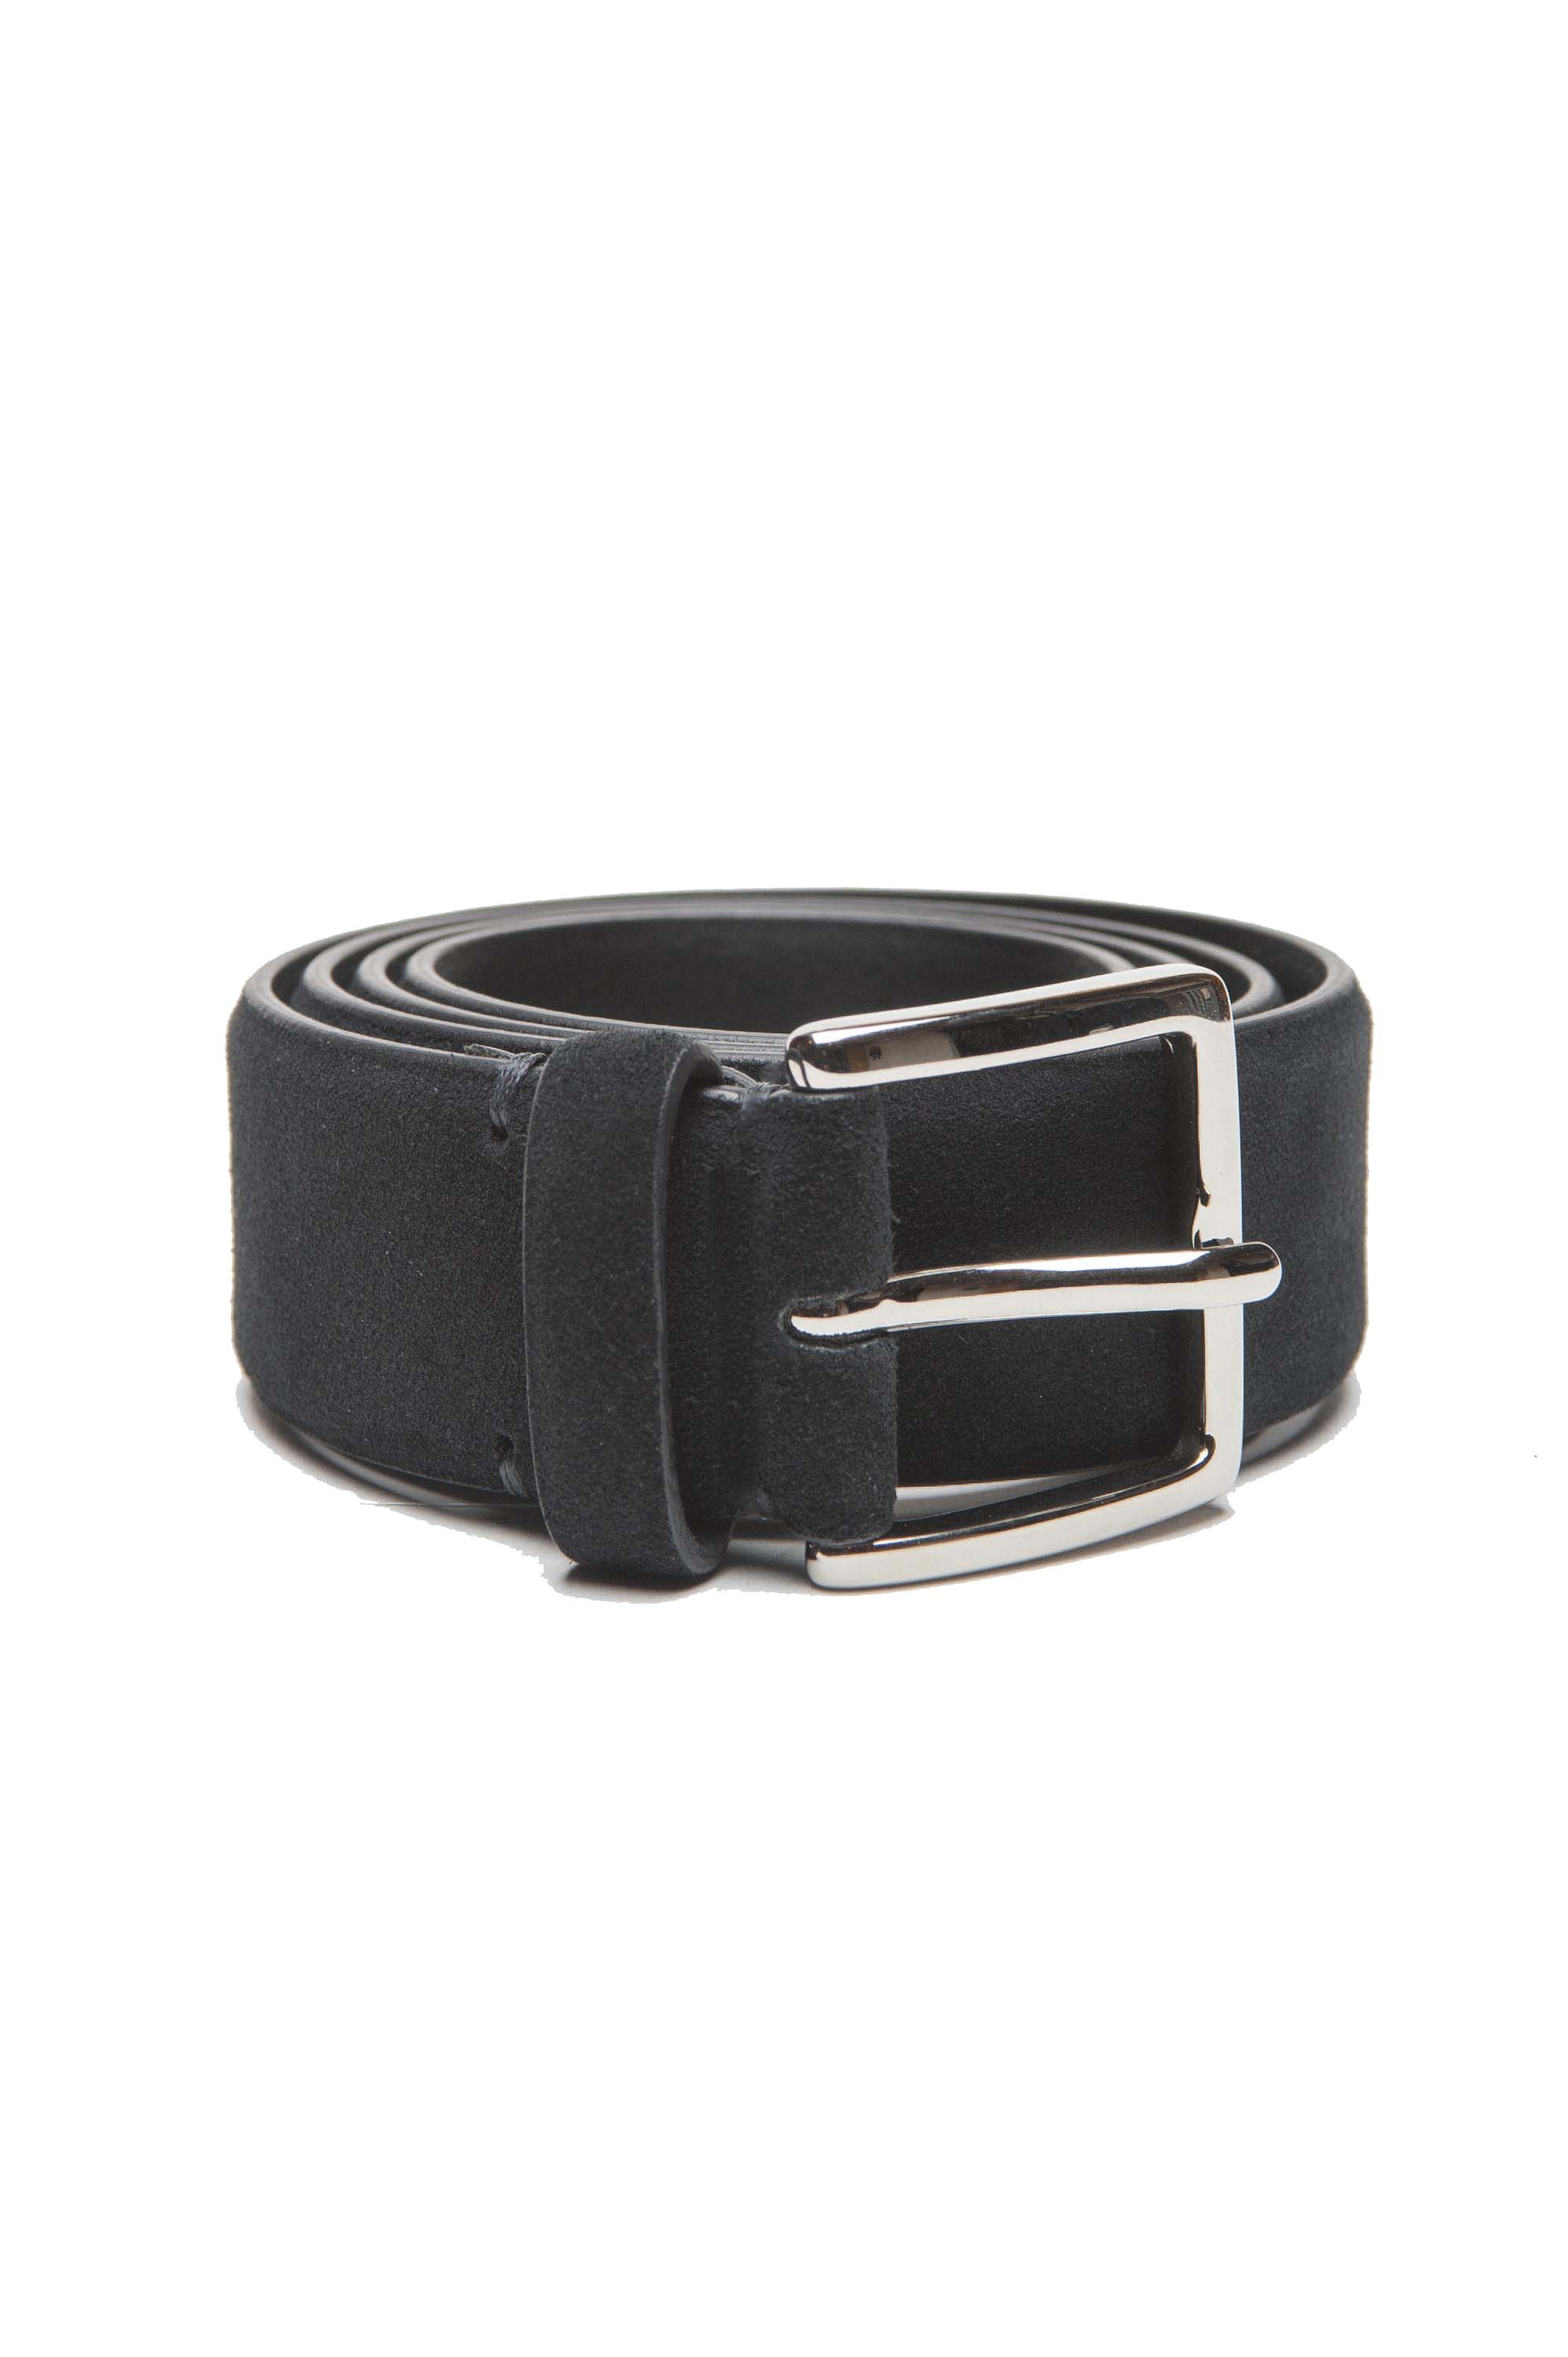 SBU 04860_24SS Classic belt in blue suede leather 1.4 inches 01